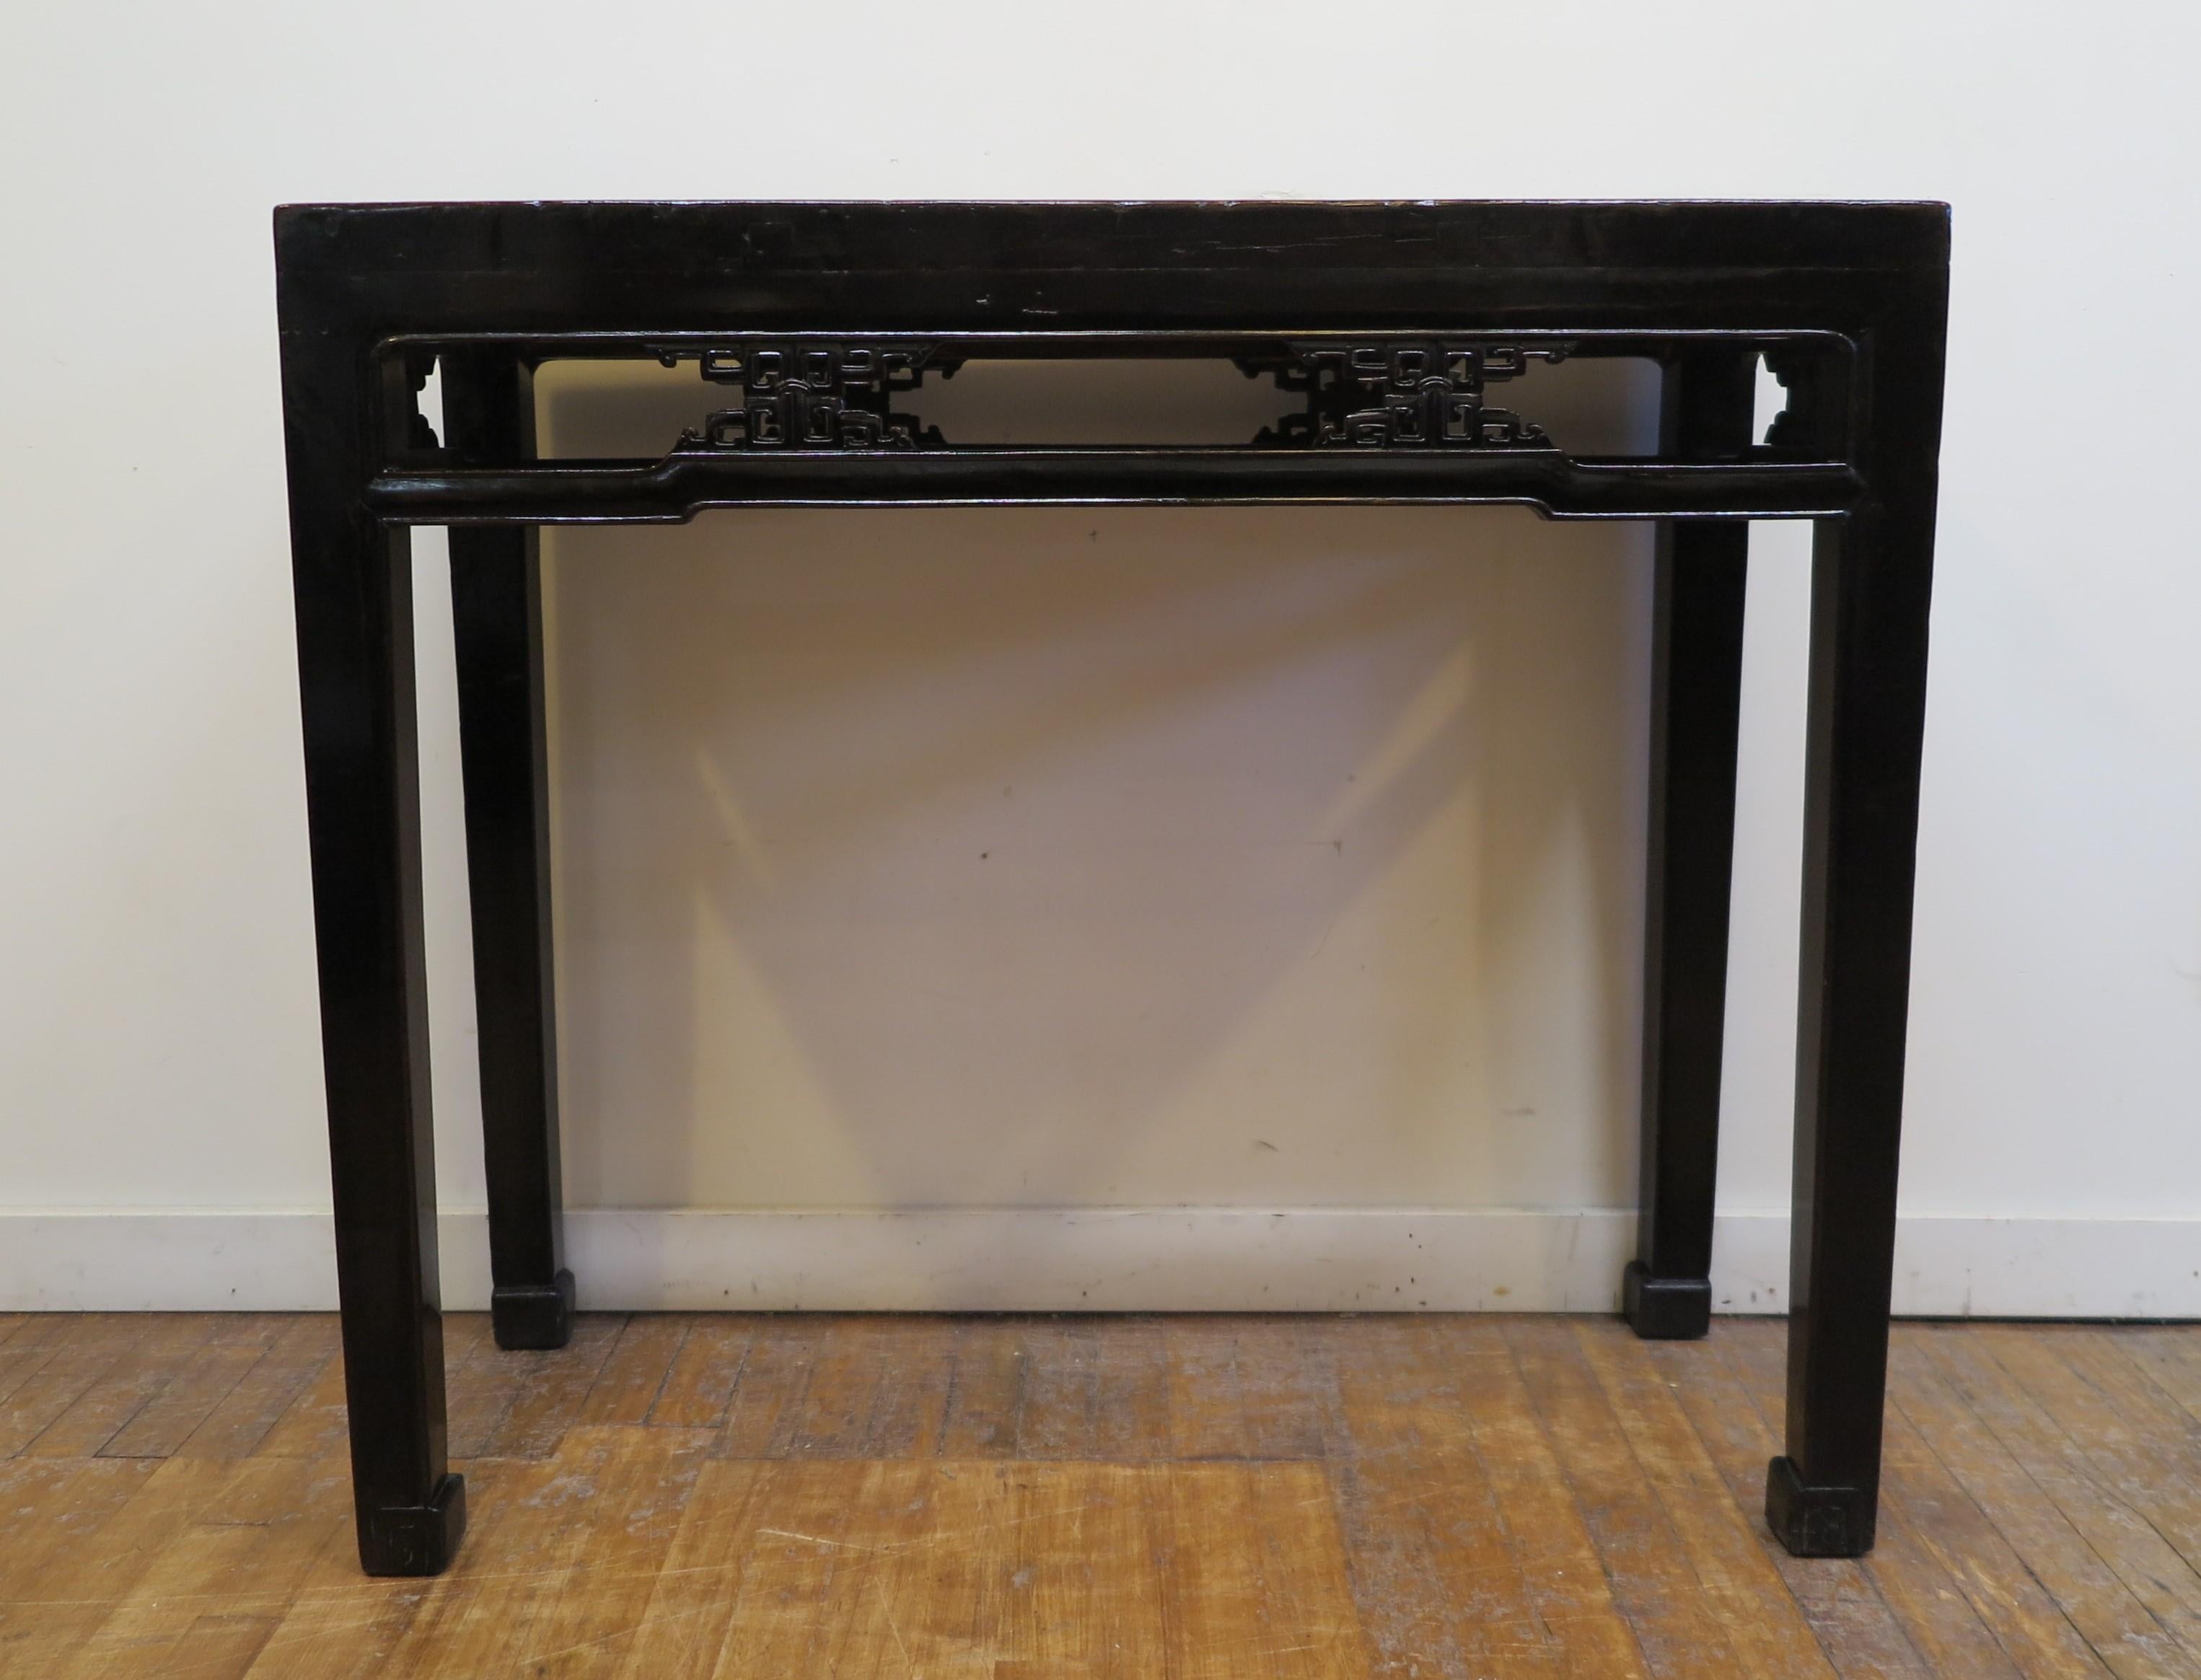 19th Century Black Lacquer Console Table. Qing Dynasty Console Table with humpback stretchers in original black lacquer. Solid Elm wood console table with auspicious double happiness carved motif detail set into the stretchers all the way around the